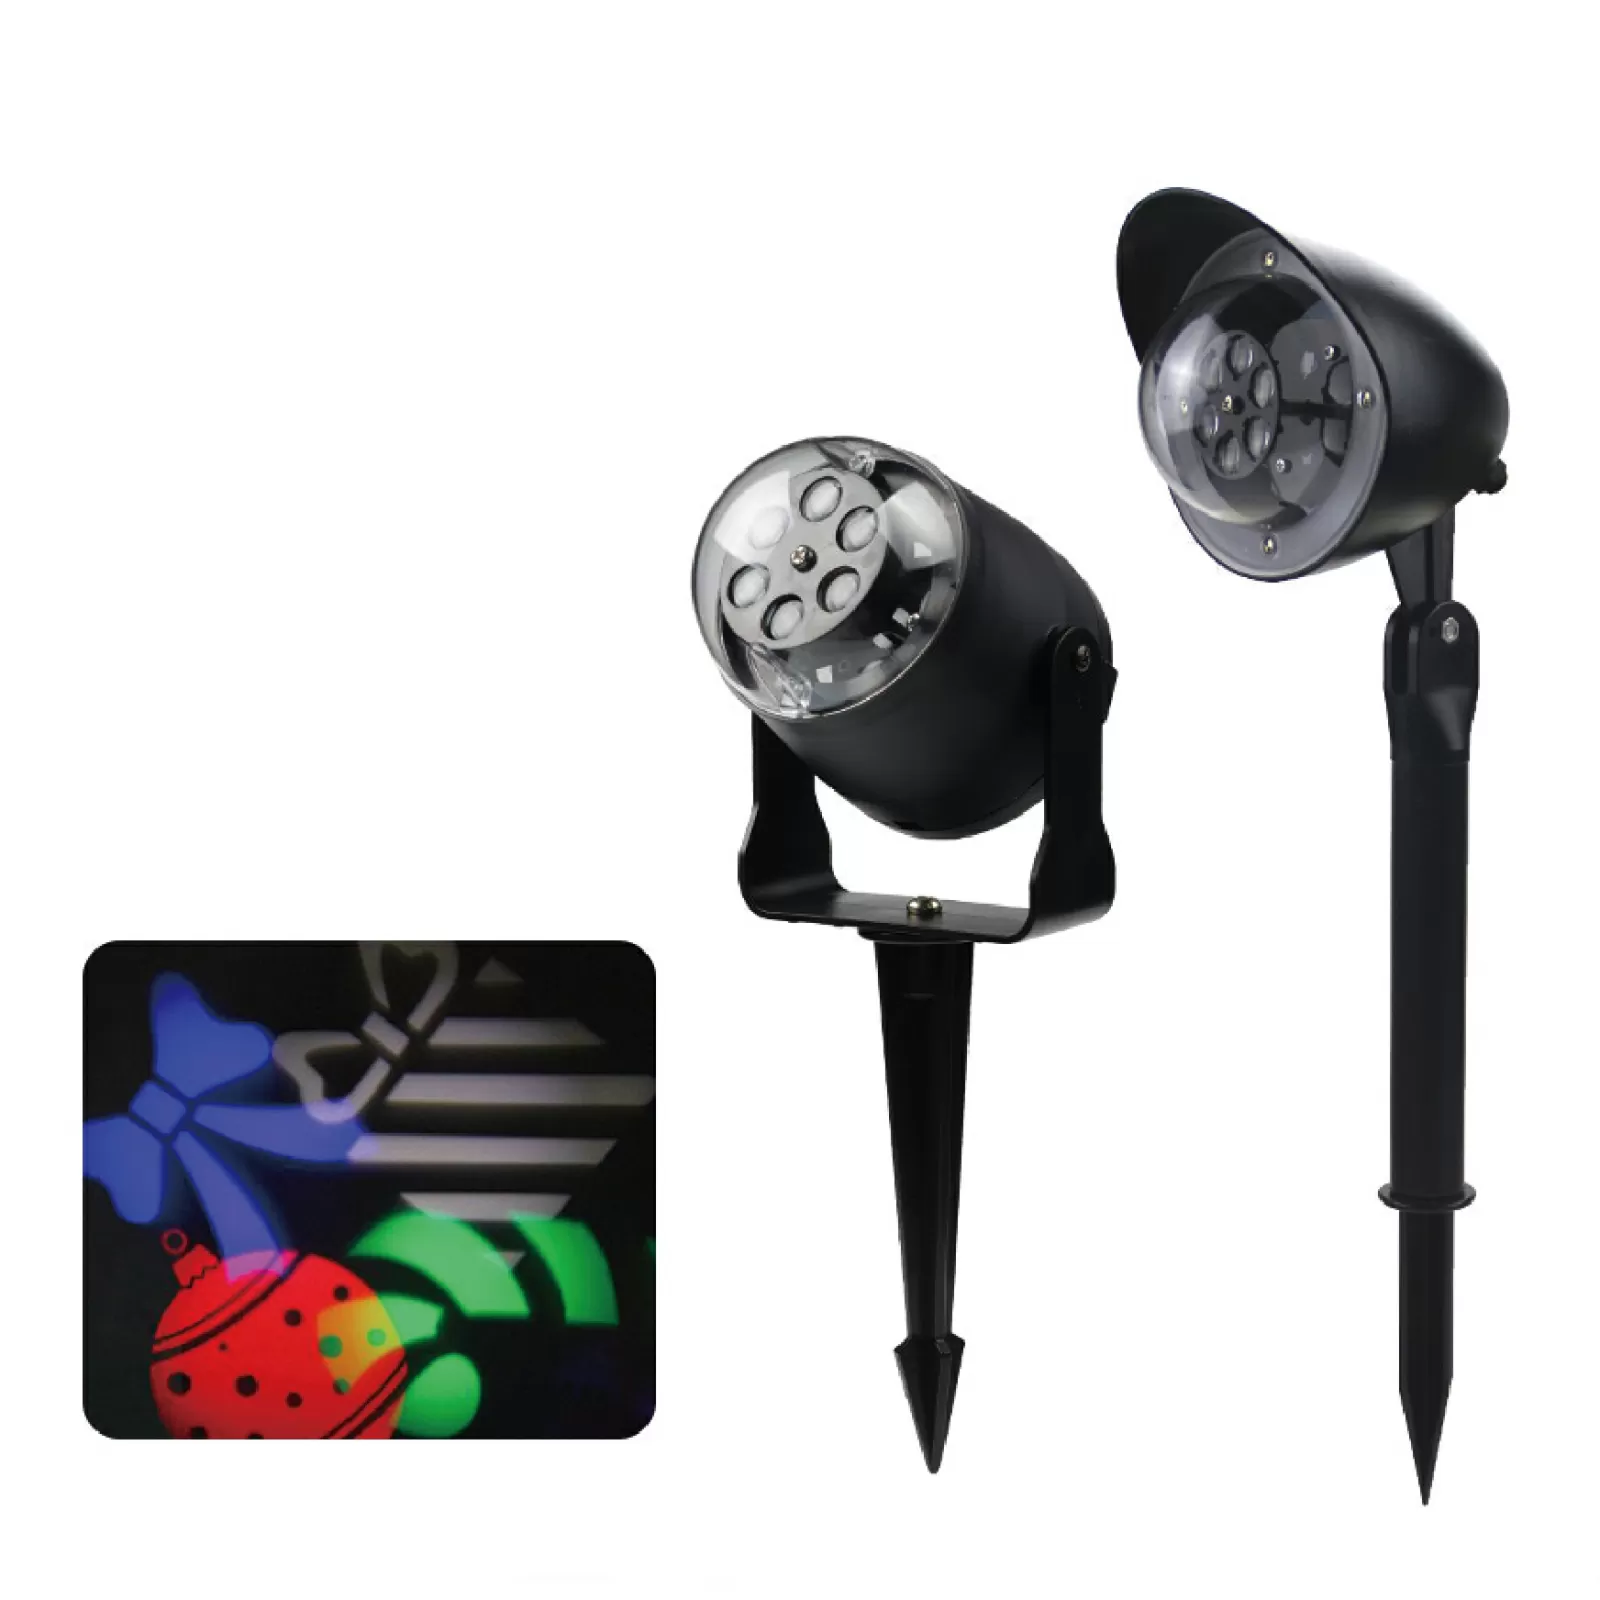 LED outdoor holiday projection light